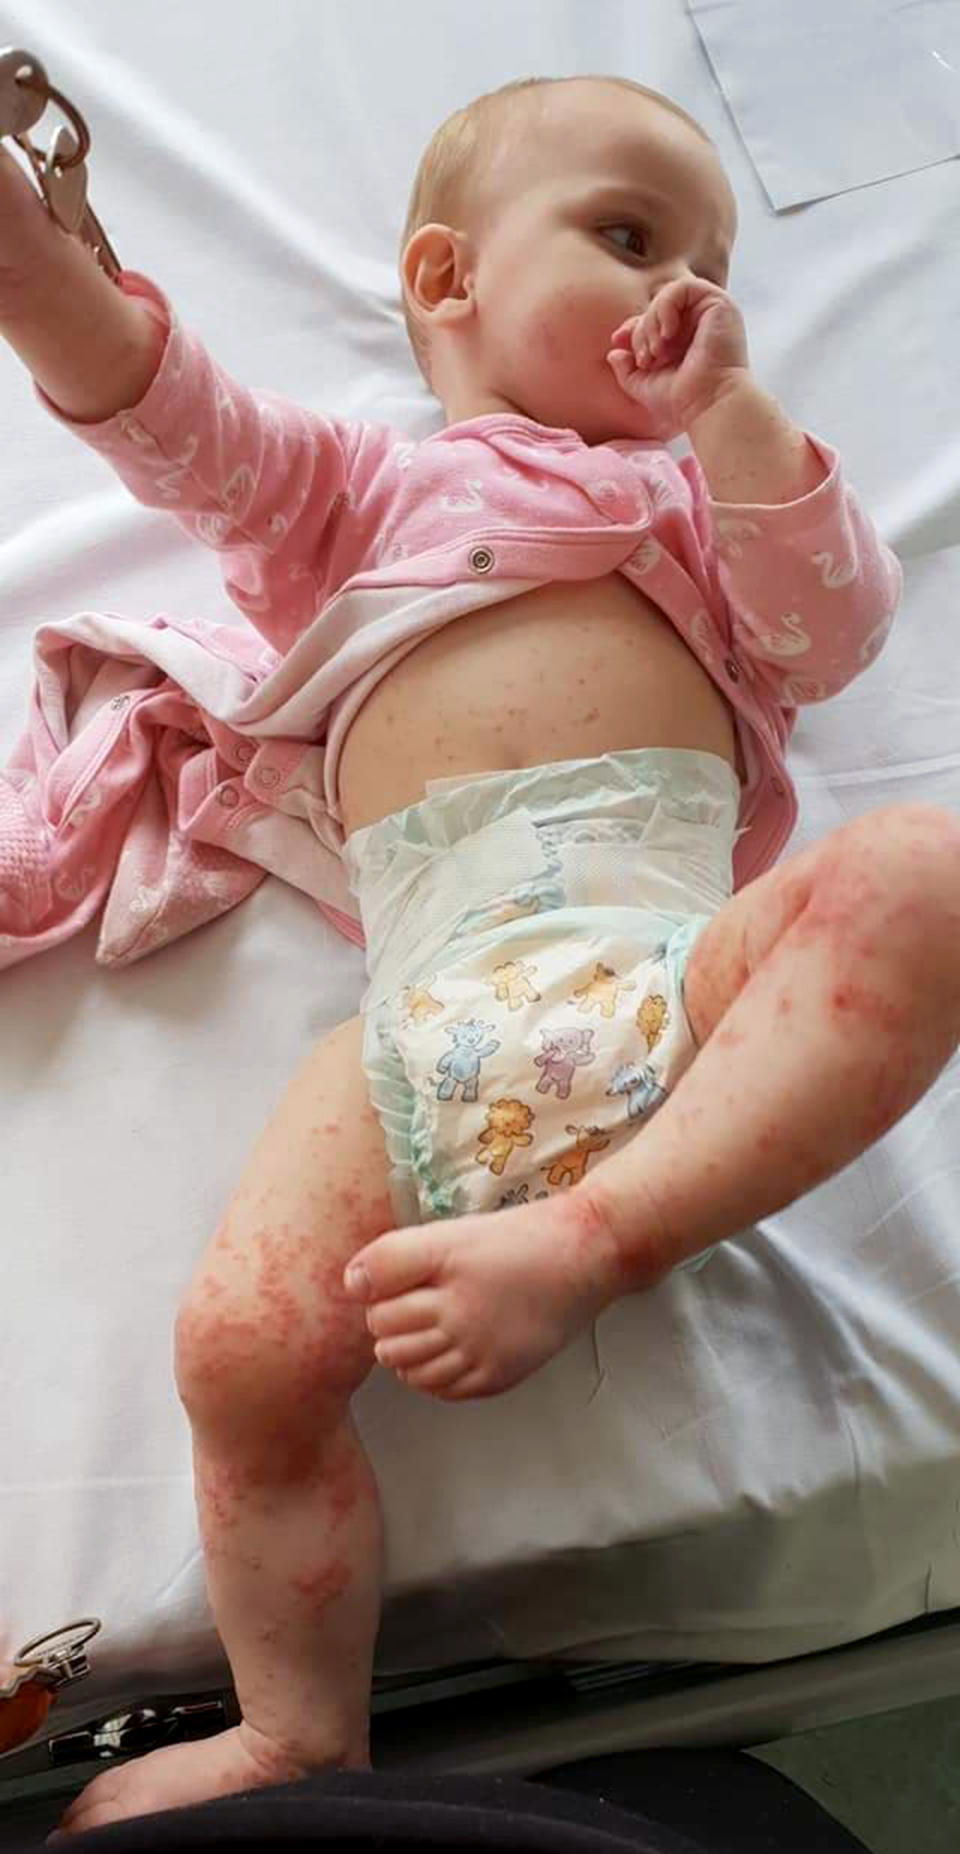 One-year-old Kaylah Merritt developed a painful rash after being kissed by a family member while they had a cold sore [Photo: Caters]